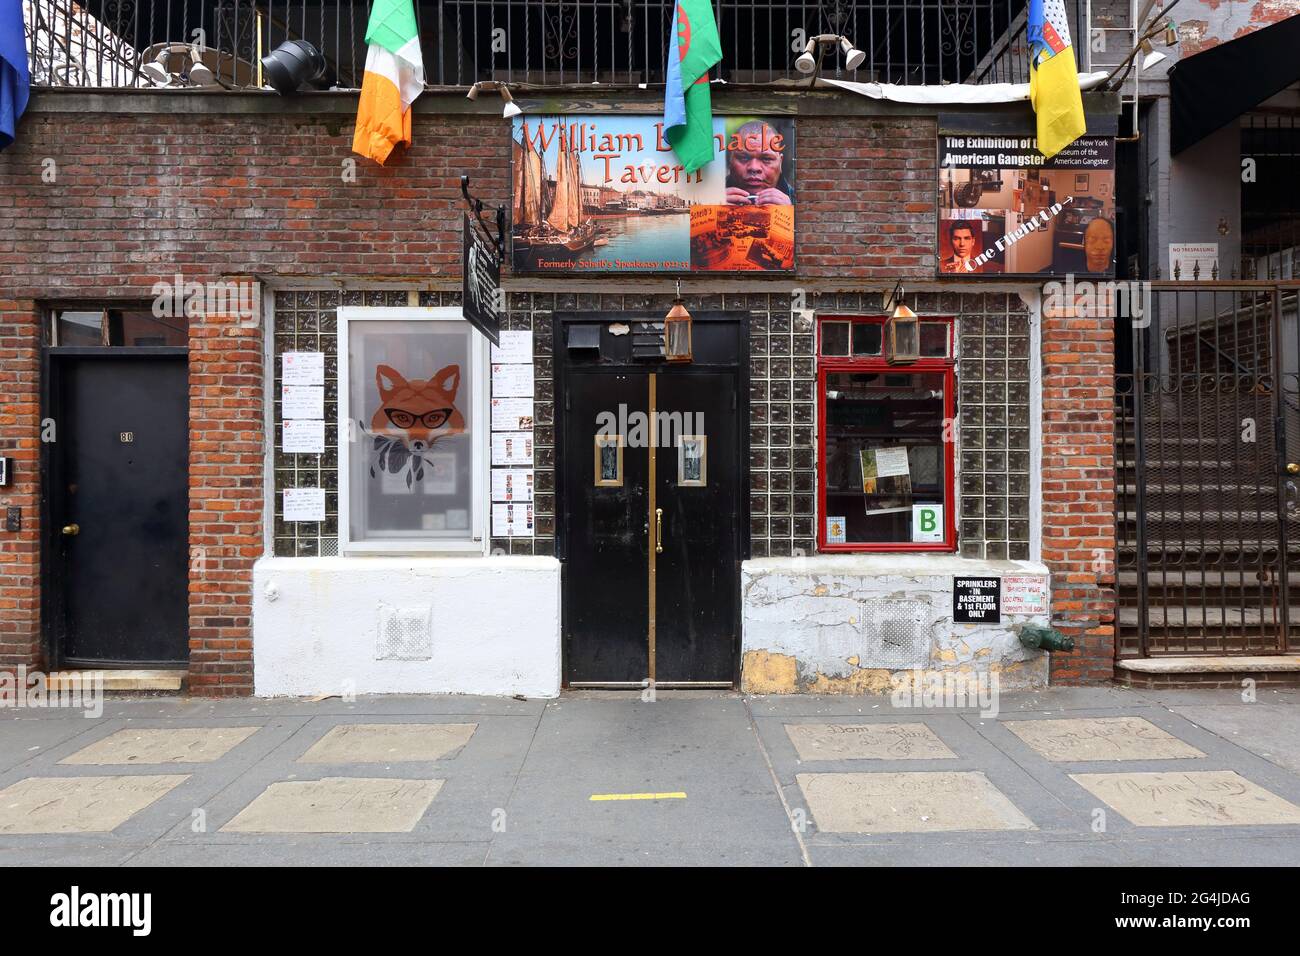 William Barnacle Tavern, 80 St Marks Place, New York, NYC storefront photo of a bar in the East Village neighborhood of Manhattan. Stock Photo